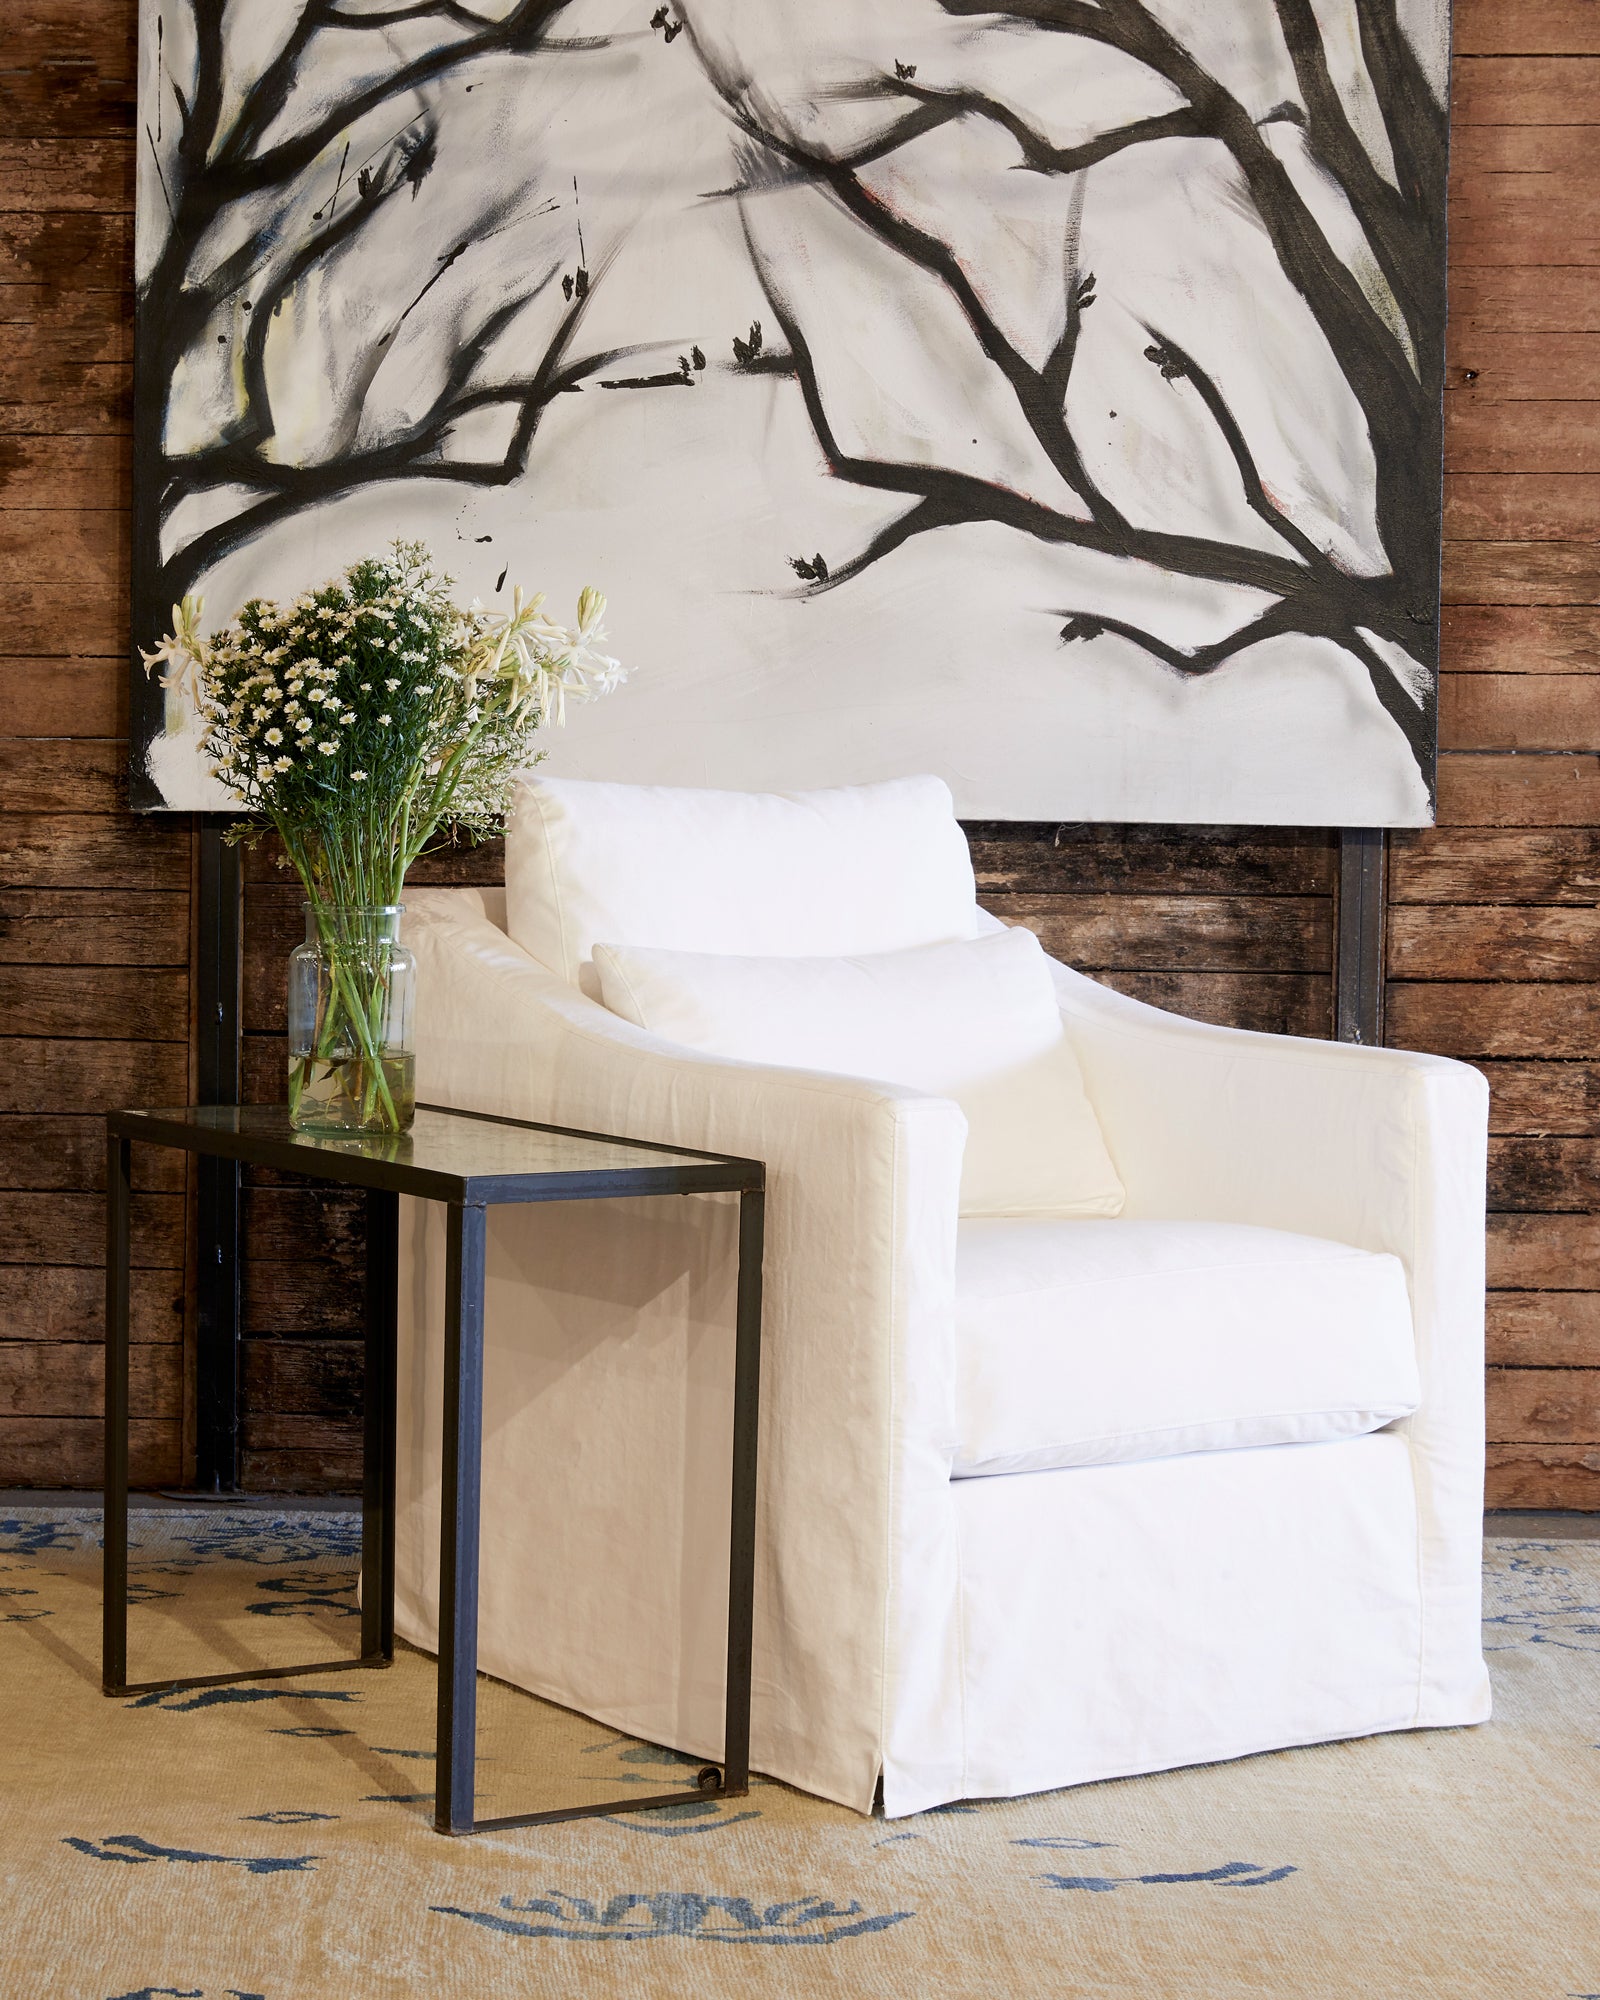  Rebecca chair in Denim White next to a metal side table. In the background is wood wall with a large painting of tree branches. Photographed in Denim White. 